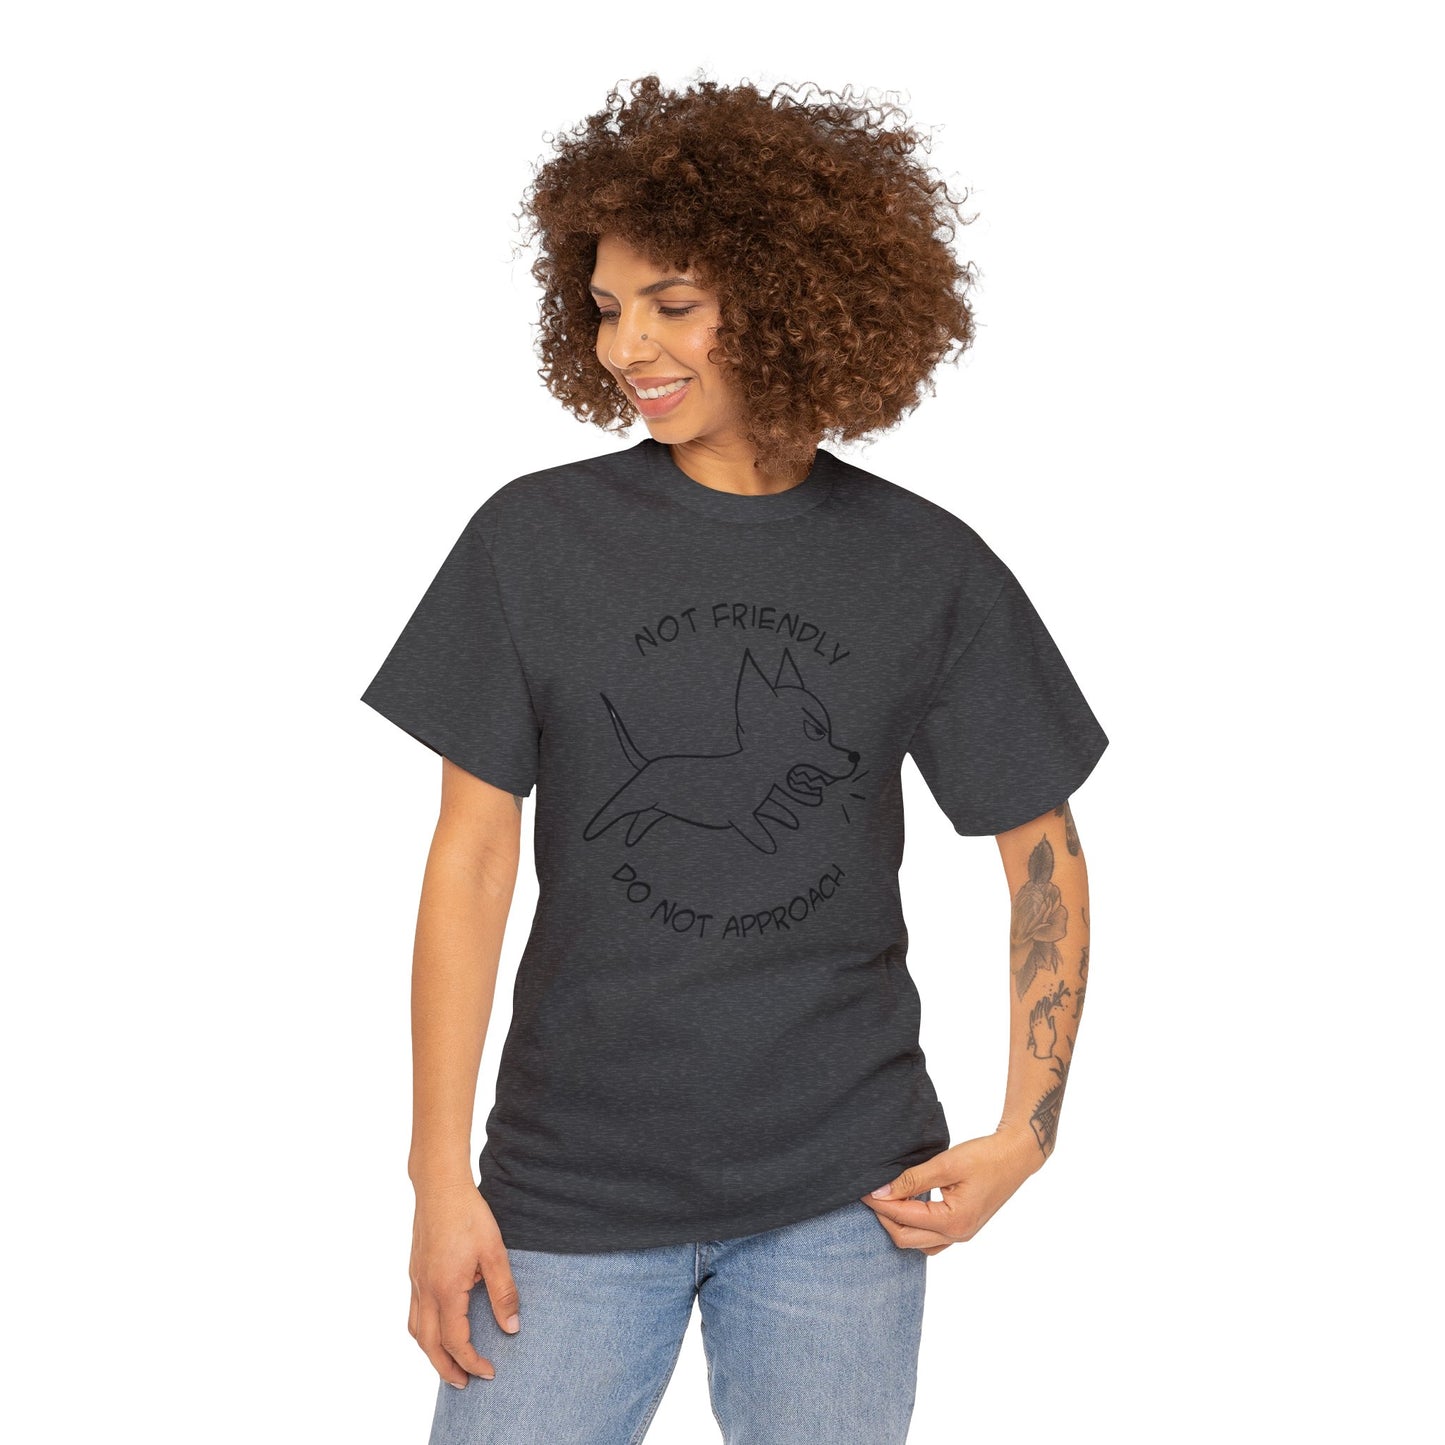 "Do Not Approach" T-Shirt - Weave Got Gifts - Unique Gifts You Won’t Find Anywhere Else!